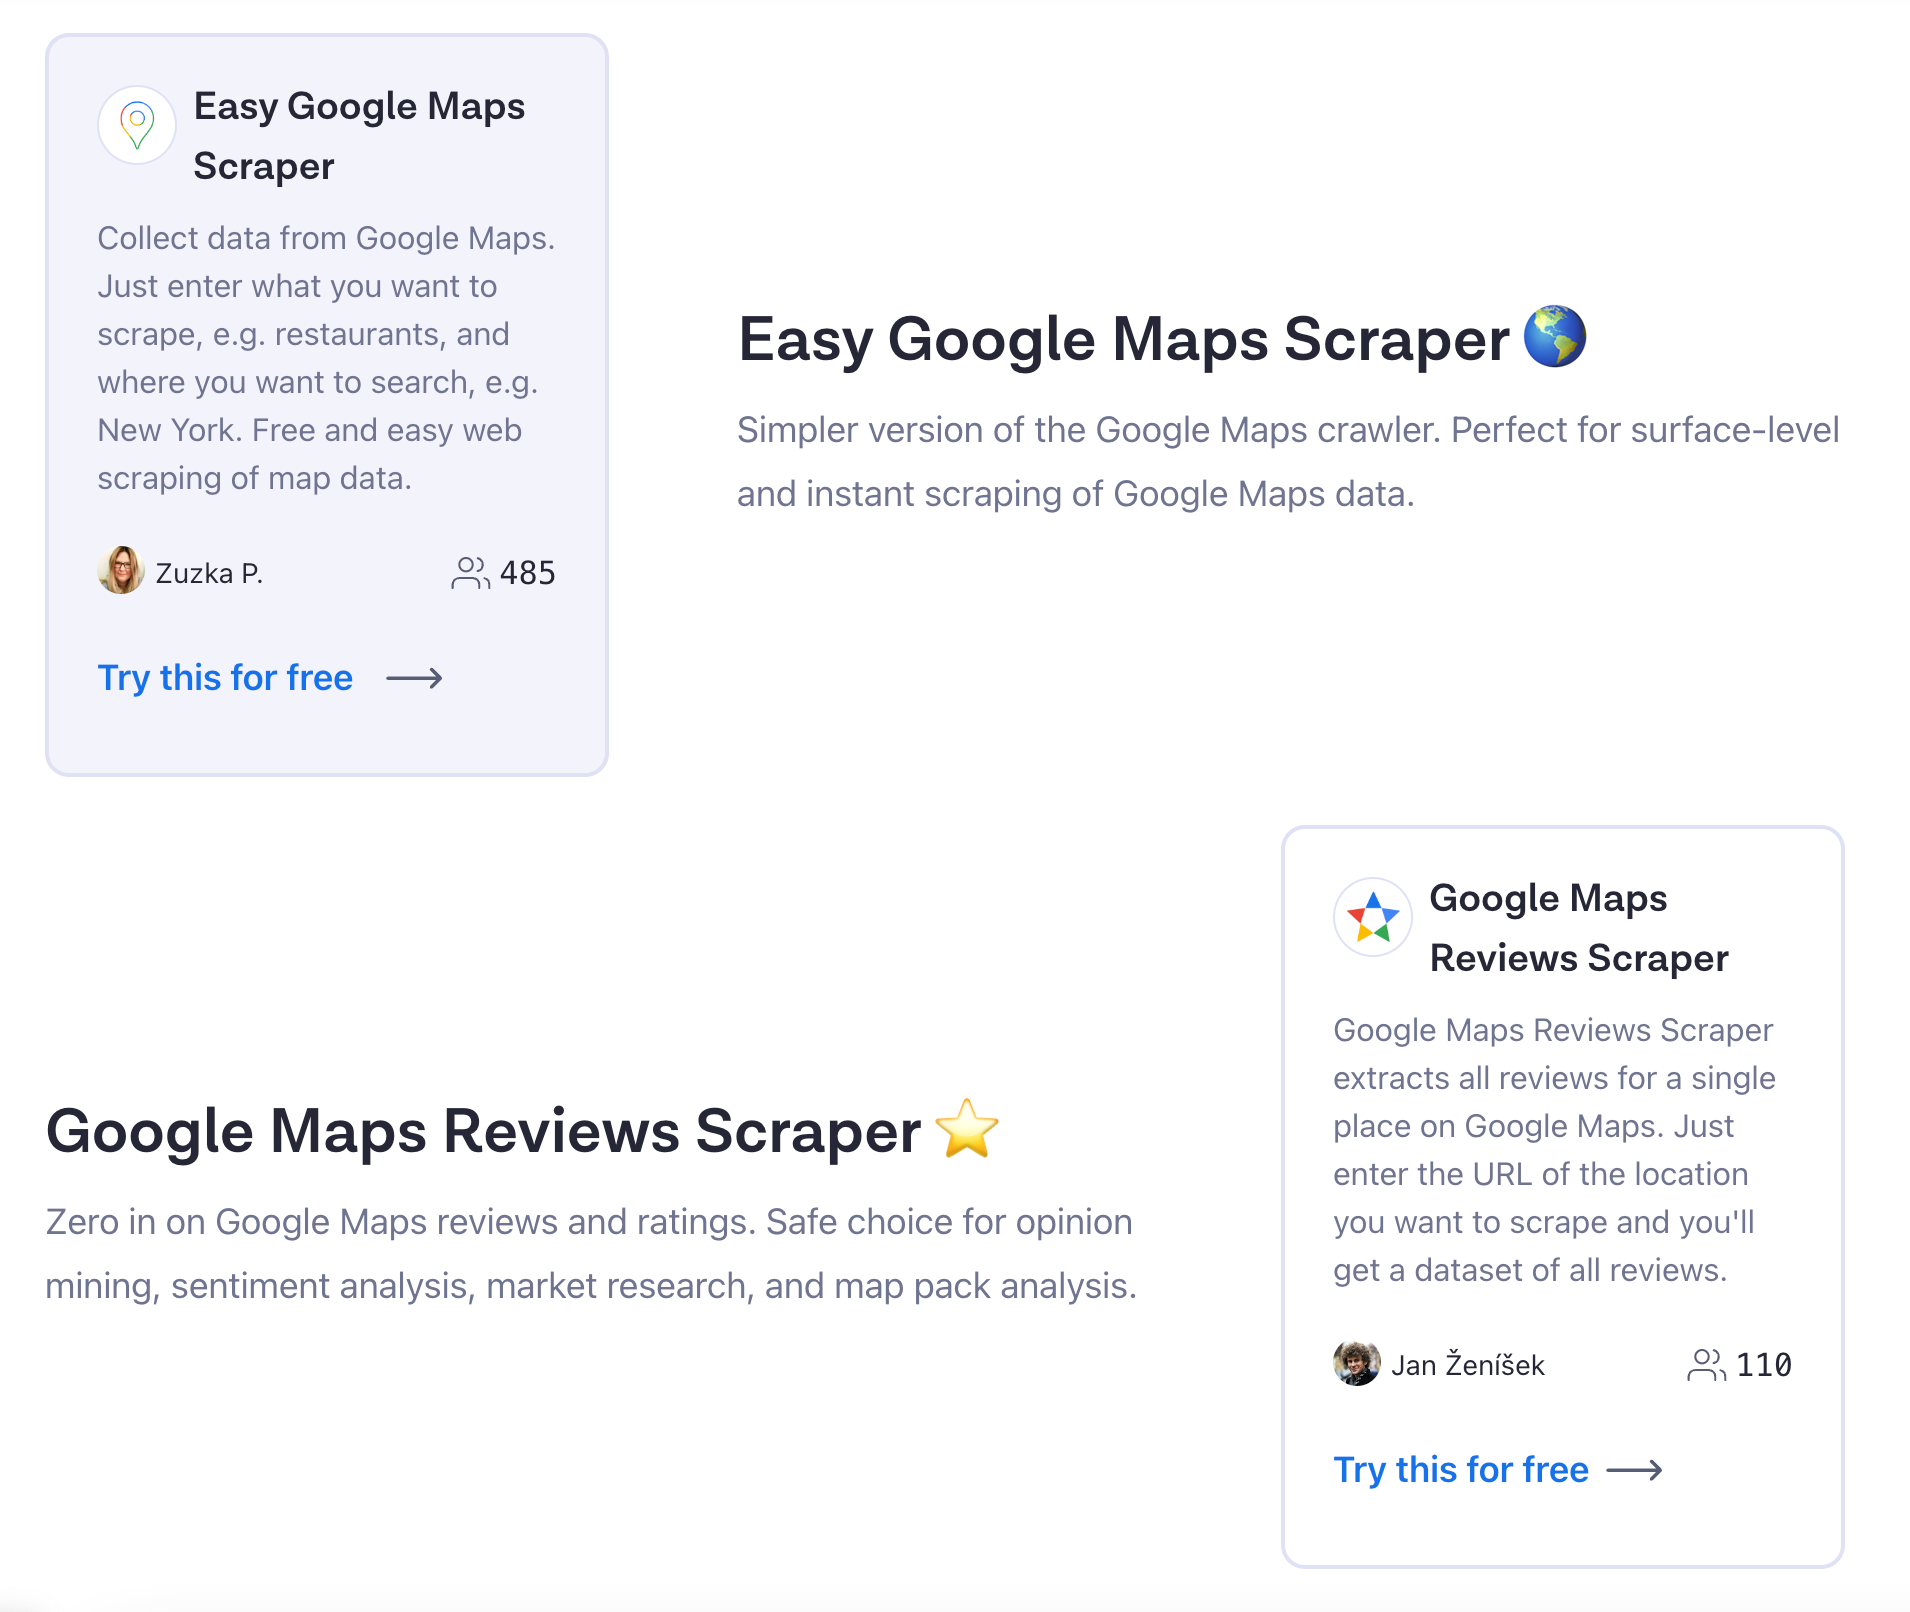 Sometimes less is more. Check out our targeted scrapers for Google Maps